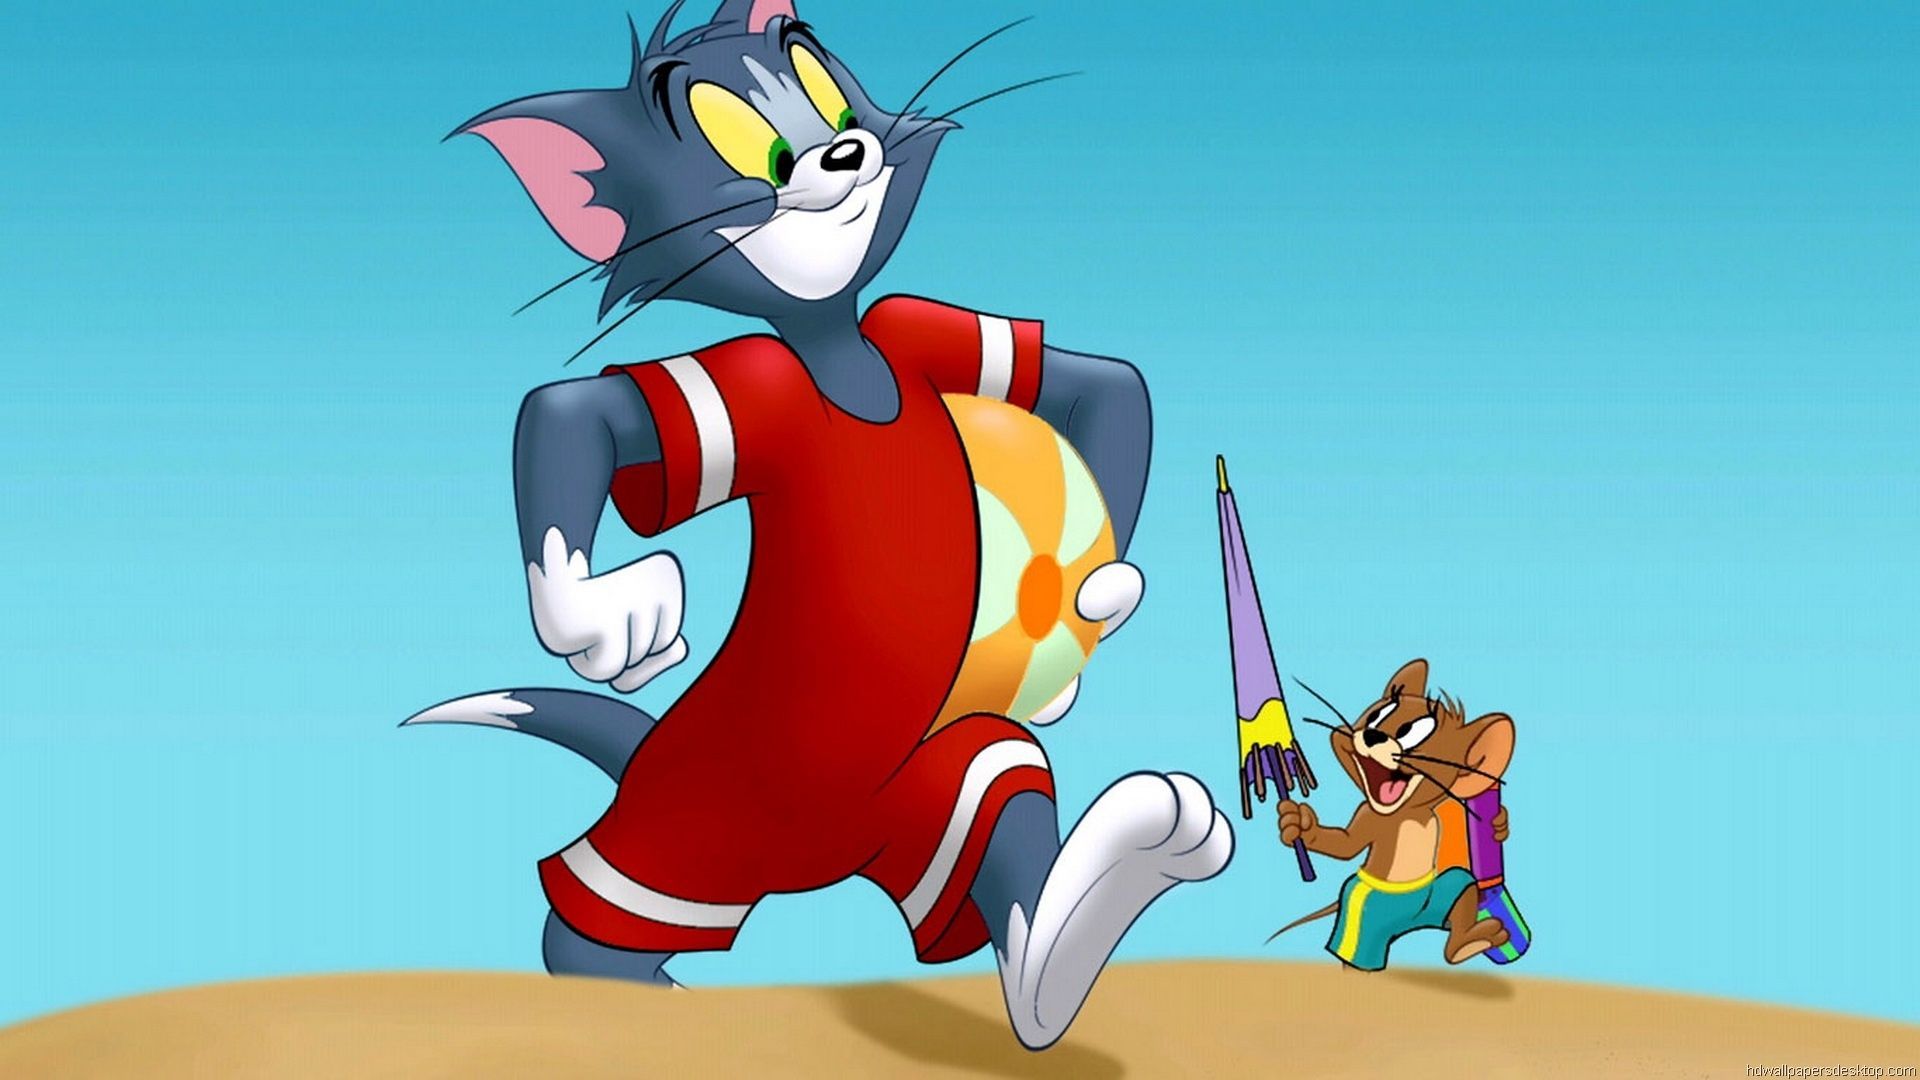 Tom And Jerry wallpaper. Tom and jerry cartoon, Cartoons hd, Tom and jerry wallpaper